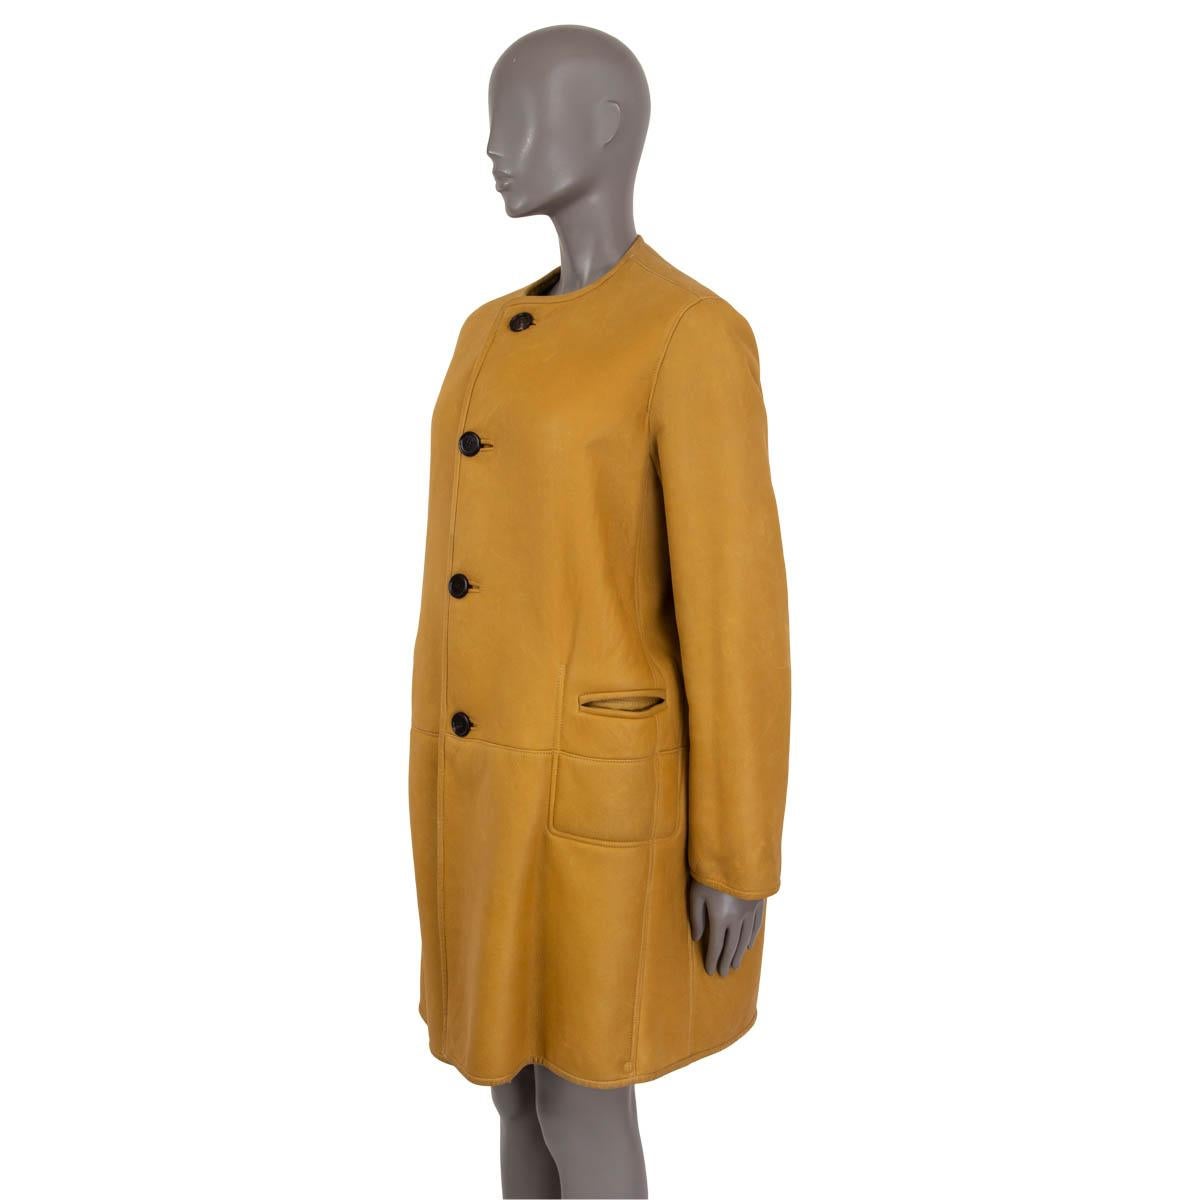 MARNI mustard yellow REVERSIBLE SHEARLING & LEATHER Coat Jacket 46 XL In Excellent Condition For Sale In Zürich, CH